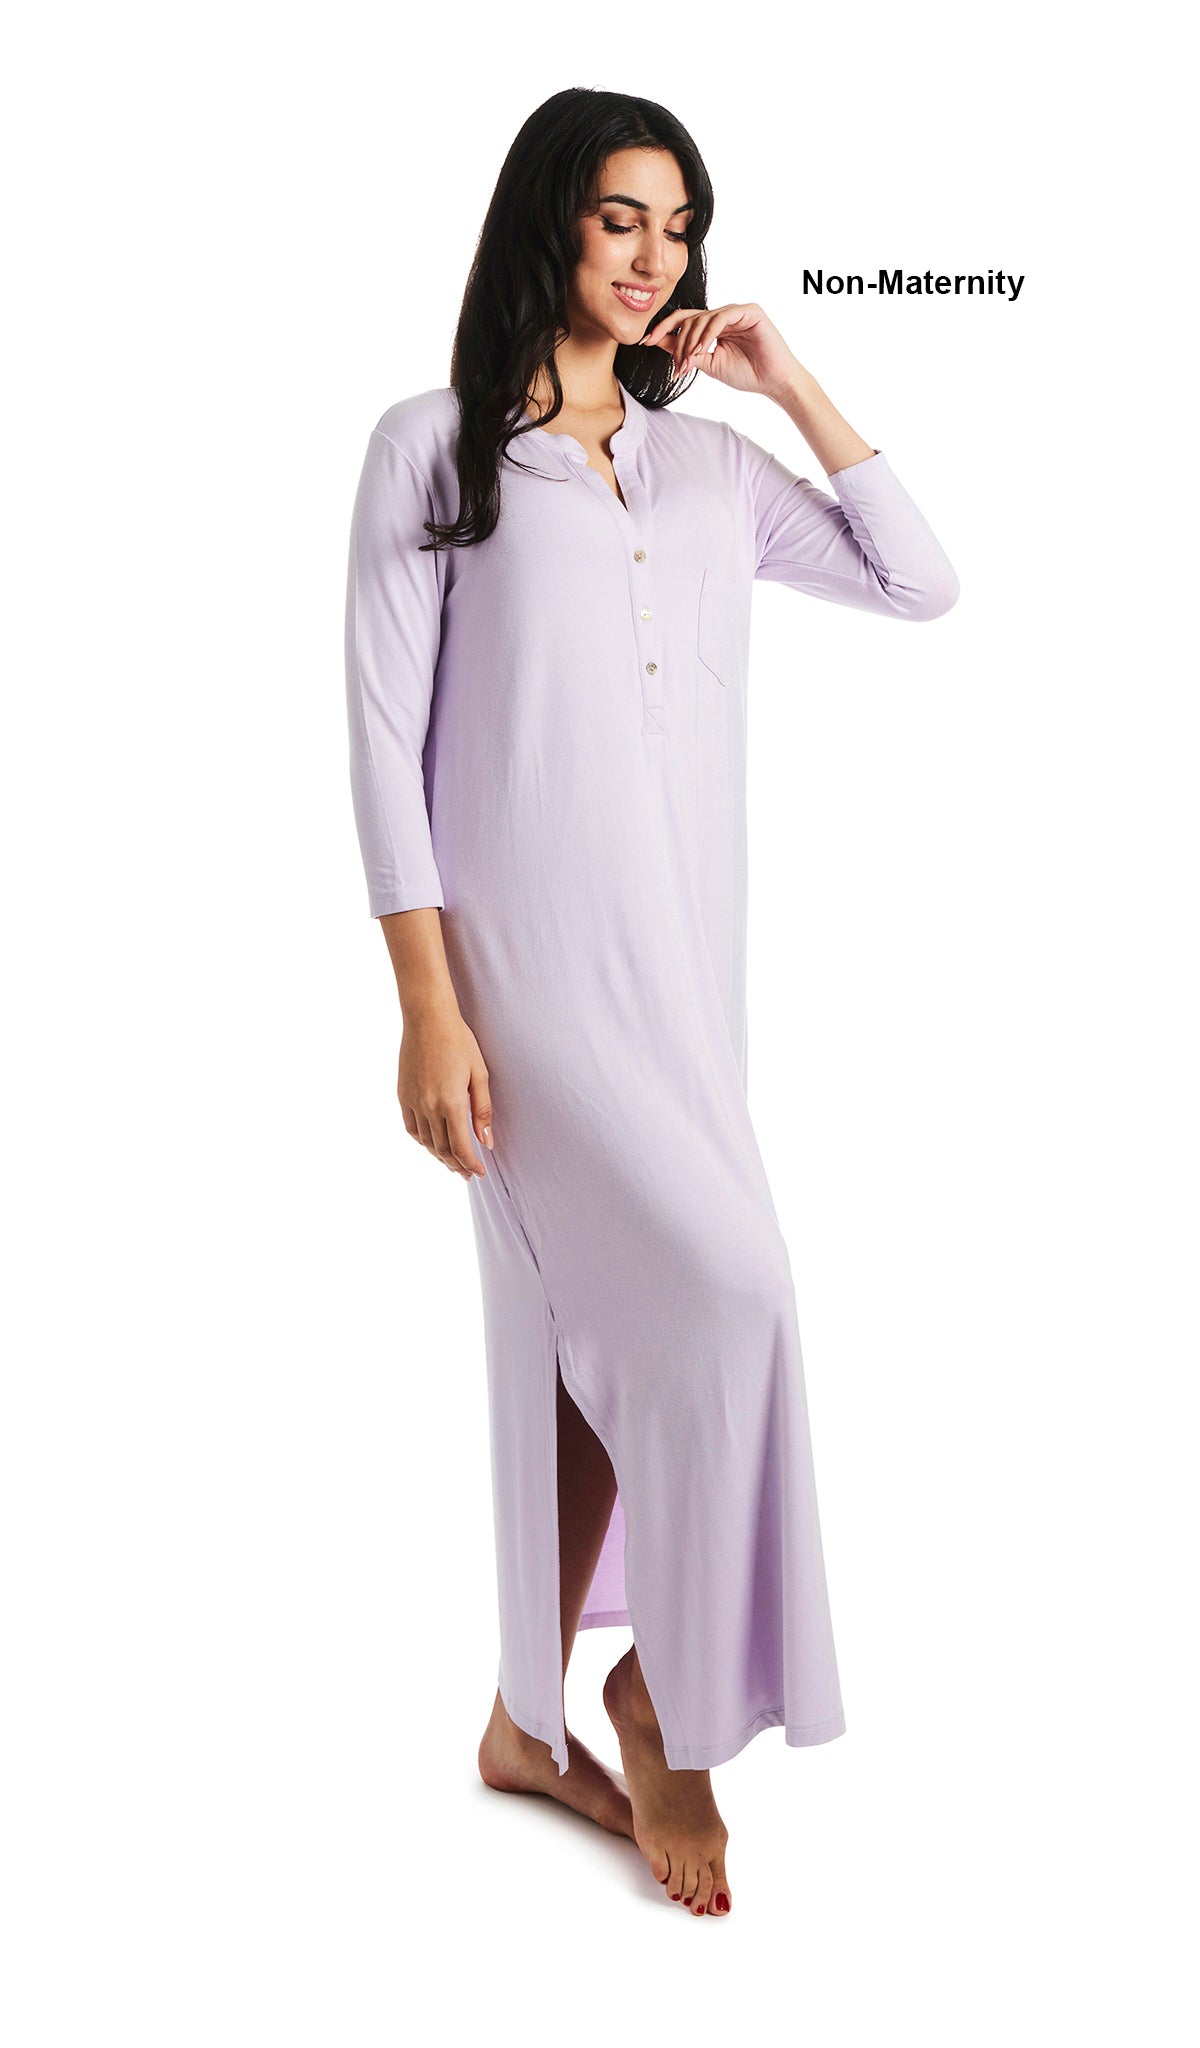 Lavender Juliana dress. Woman wearing caftan as non-maternity style featuring long sleeve button-up V-neckline with band collar and a maxi-length hem with airy side slits. One hand is down to side with fingers of other hand touching chin. 